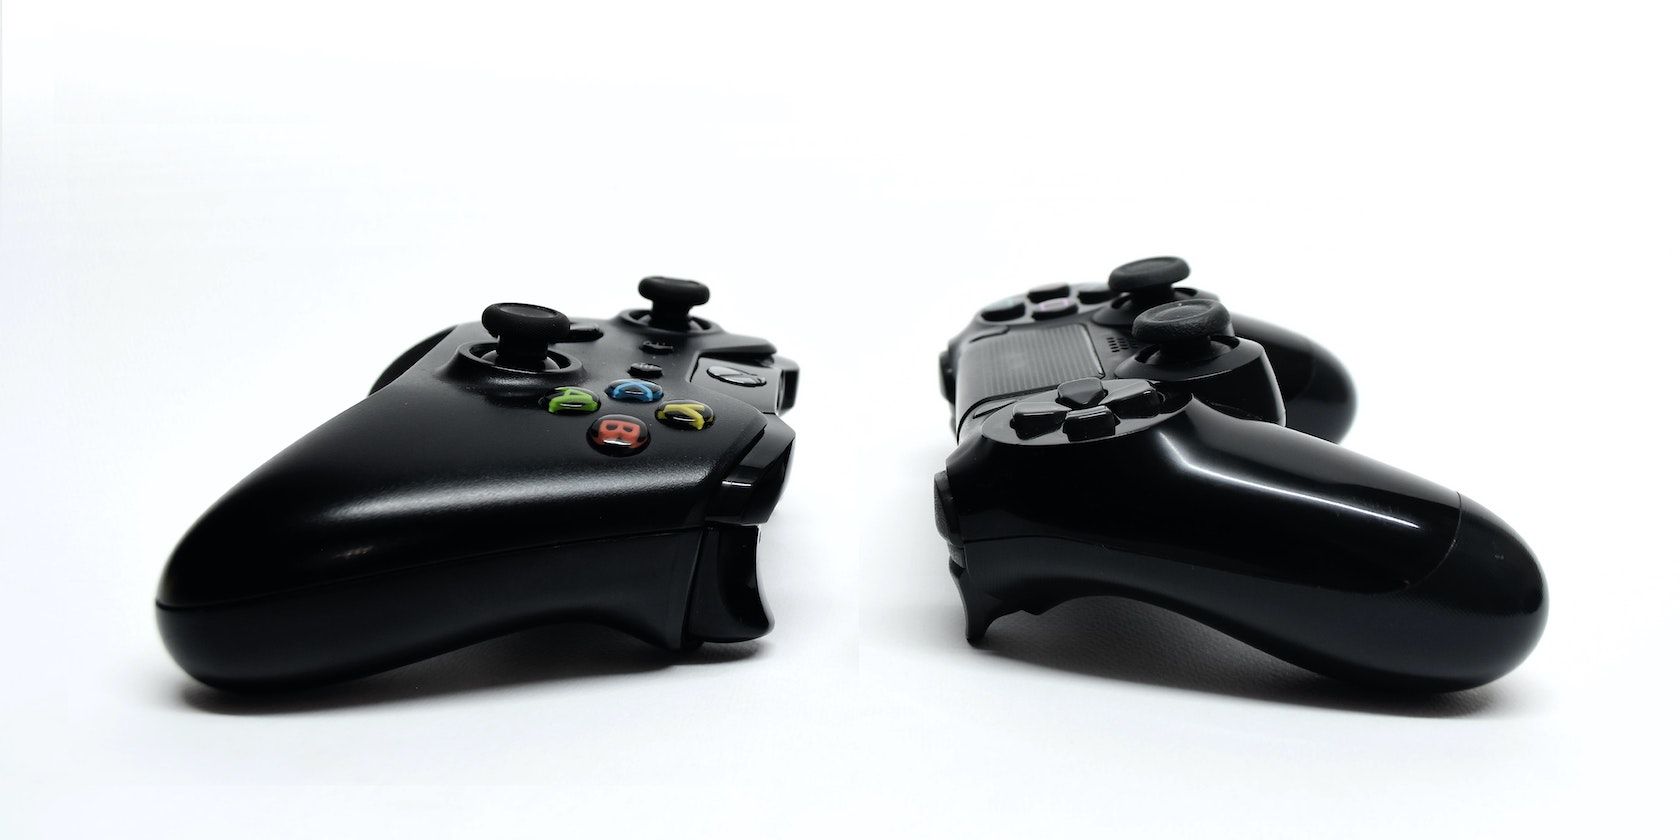 Explained: What is cross-platform gaming and how is it useful for